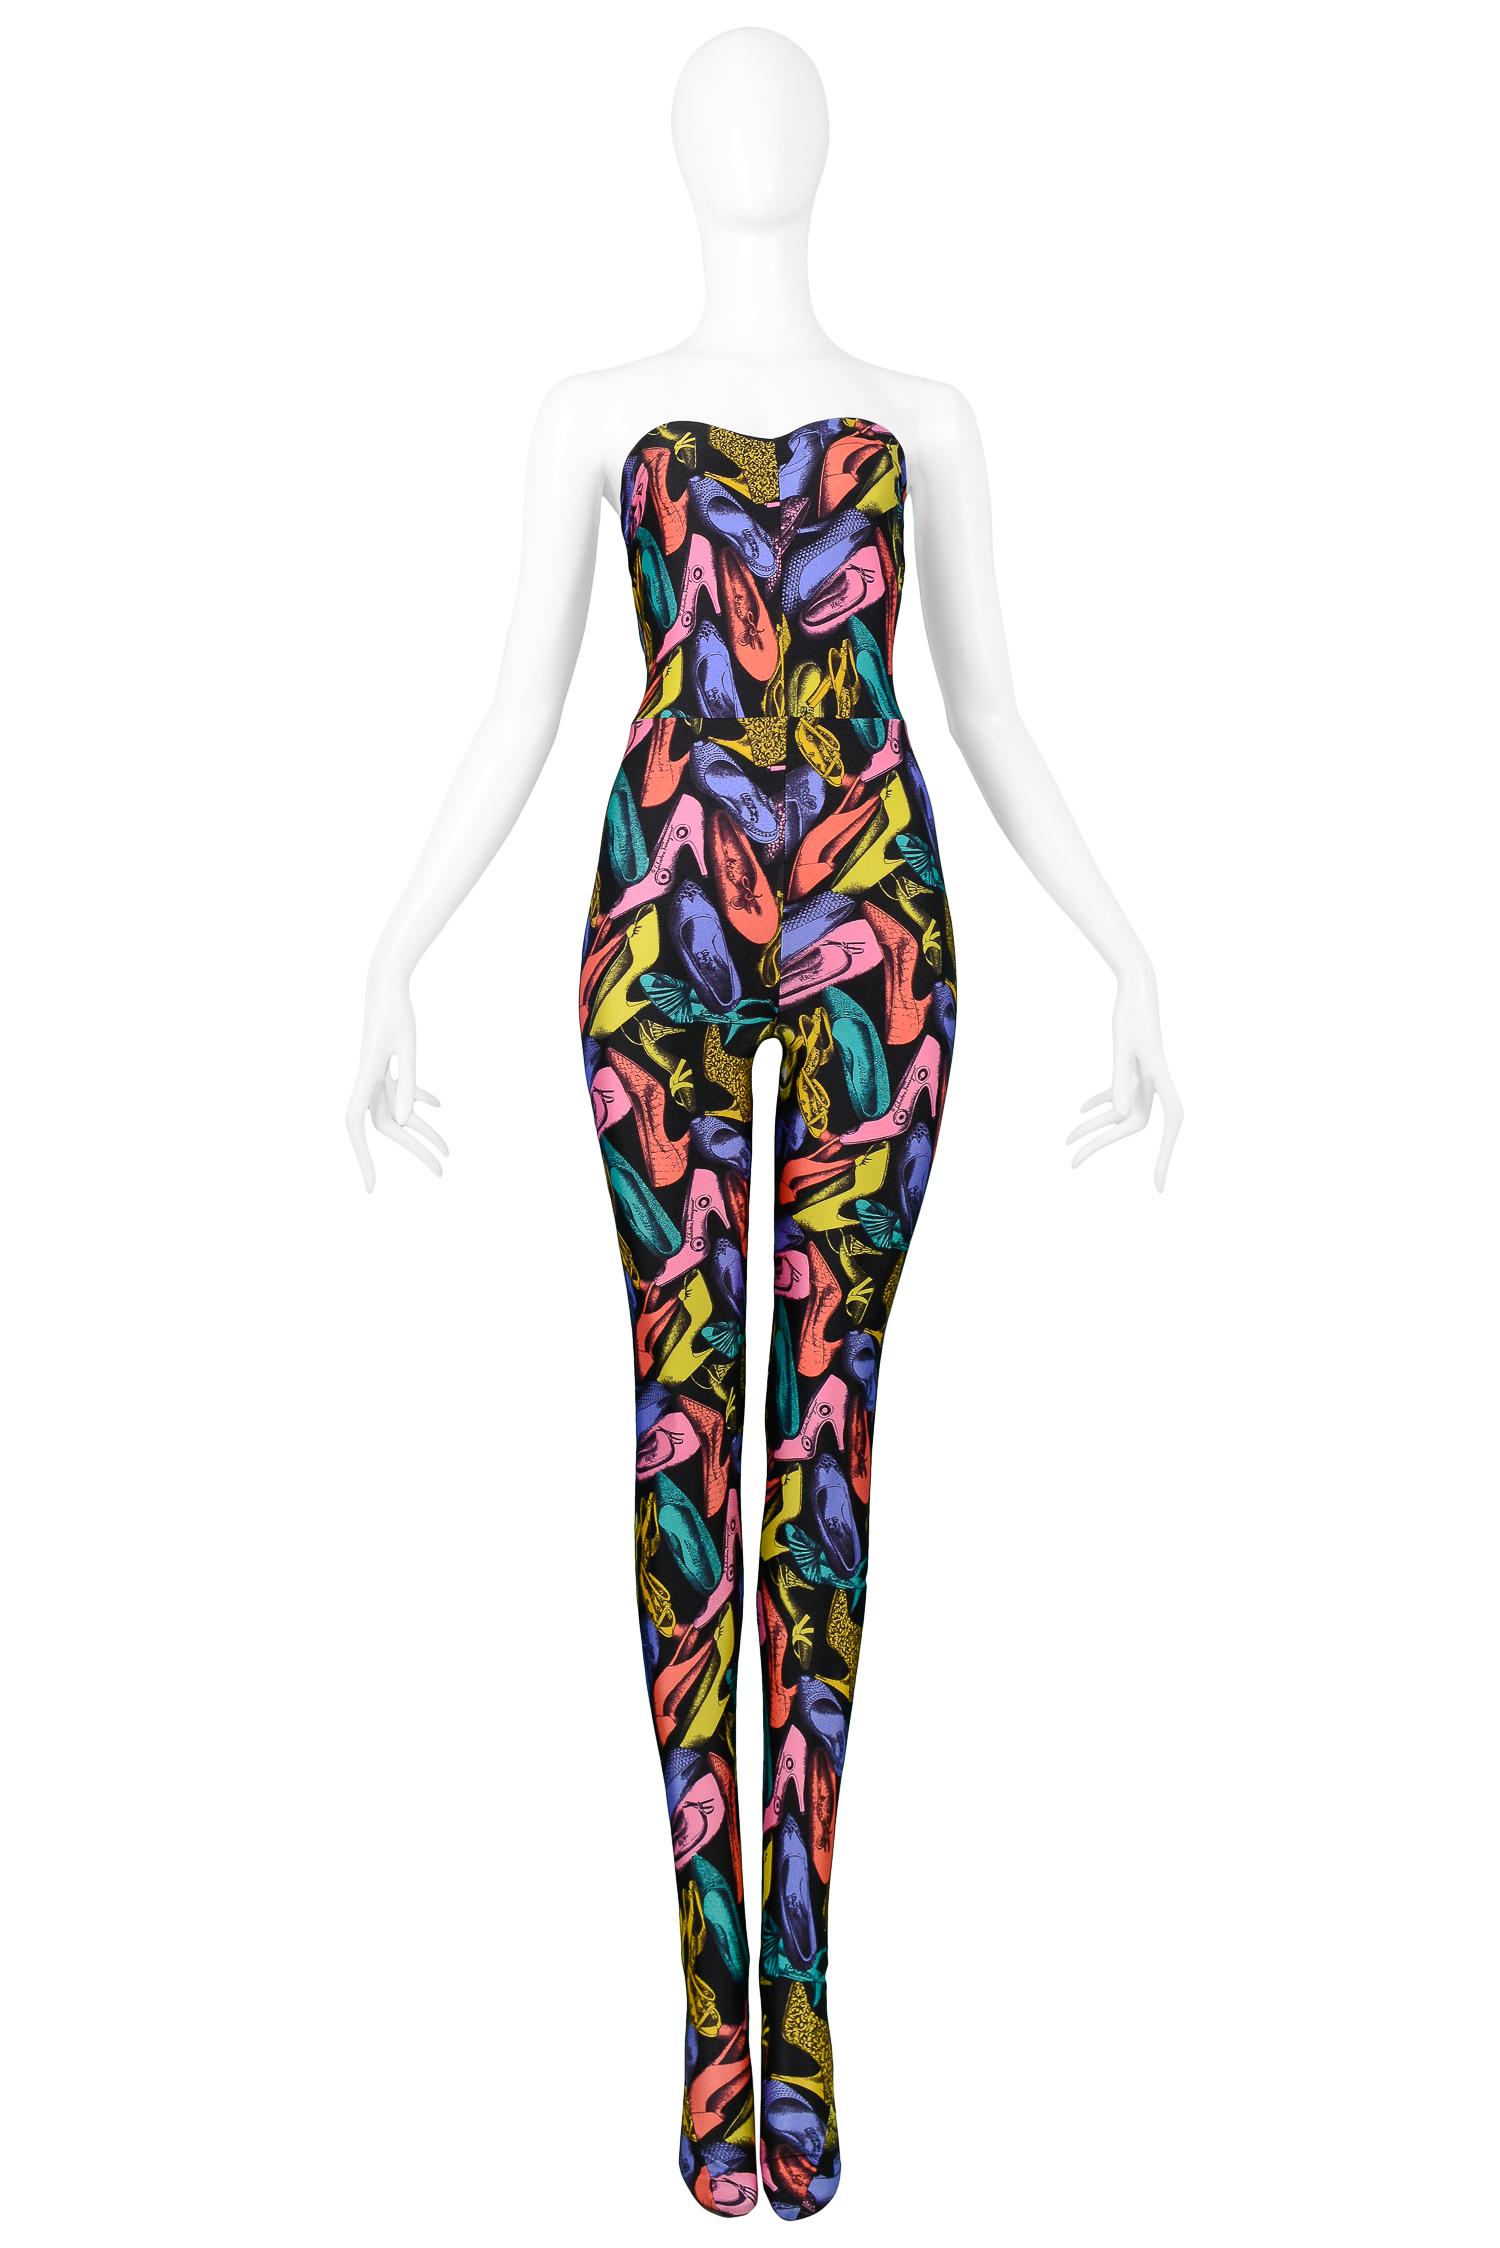 Vintage Salvatore Ferragamo multicolor shoe print silk jacket with lycra jumpsuit ensemble. The jacket features 3 gold buttons, high collar, fitted cut and is fully lined. The stretch lycra jumpsuit features a strapless sweetheart bodice and